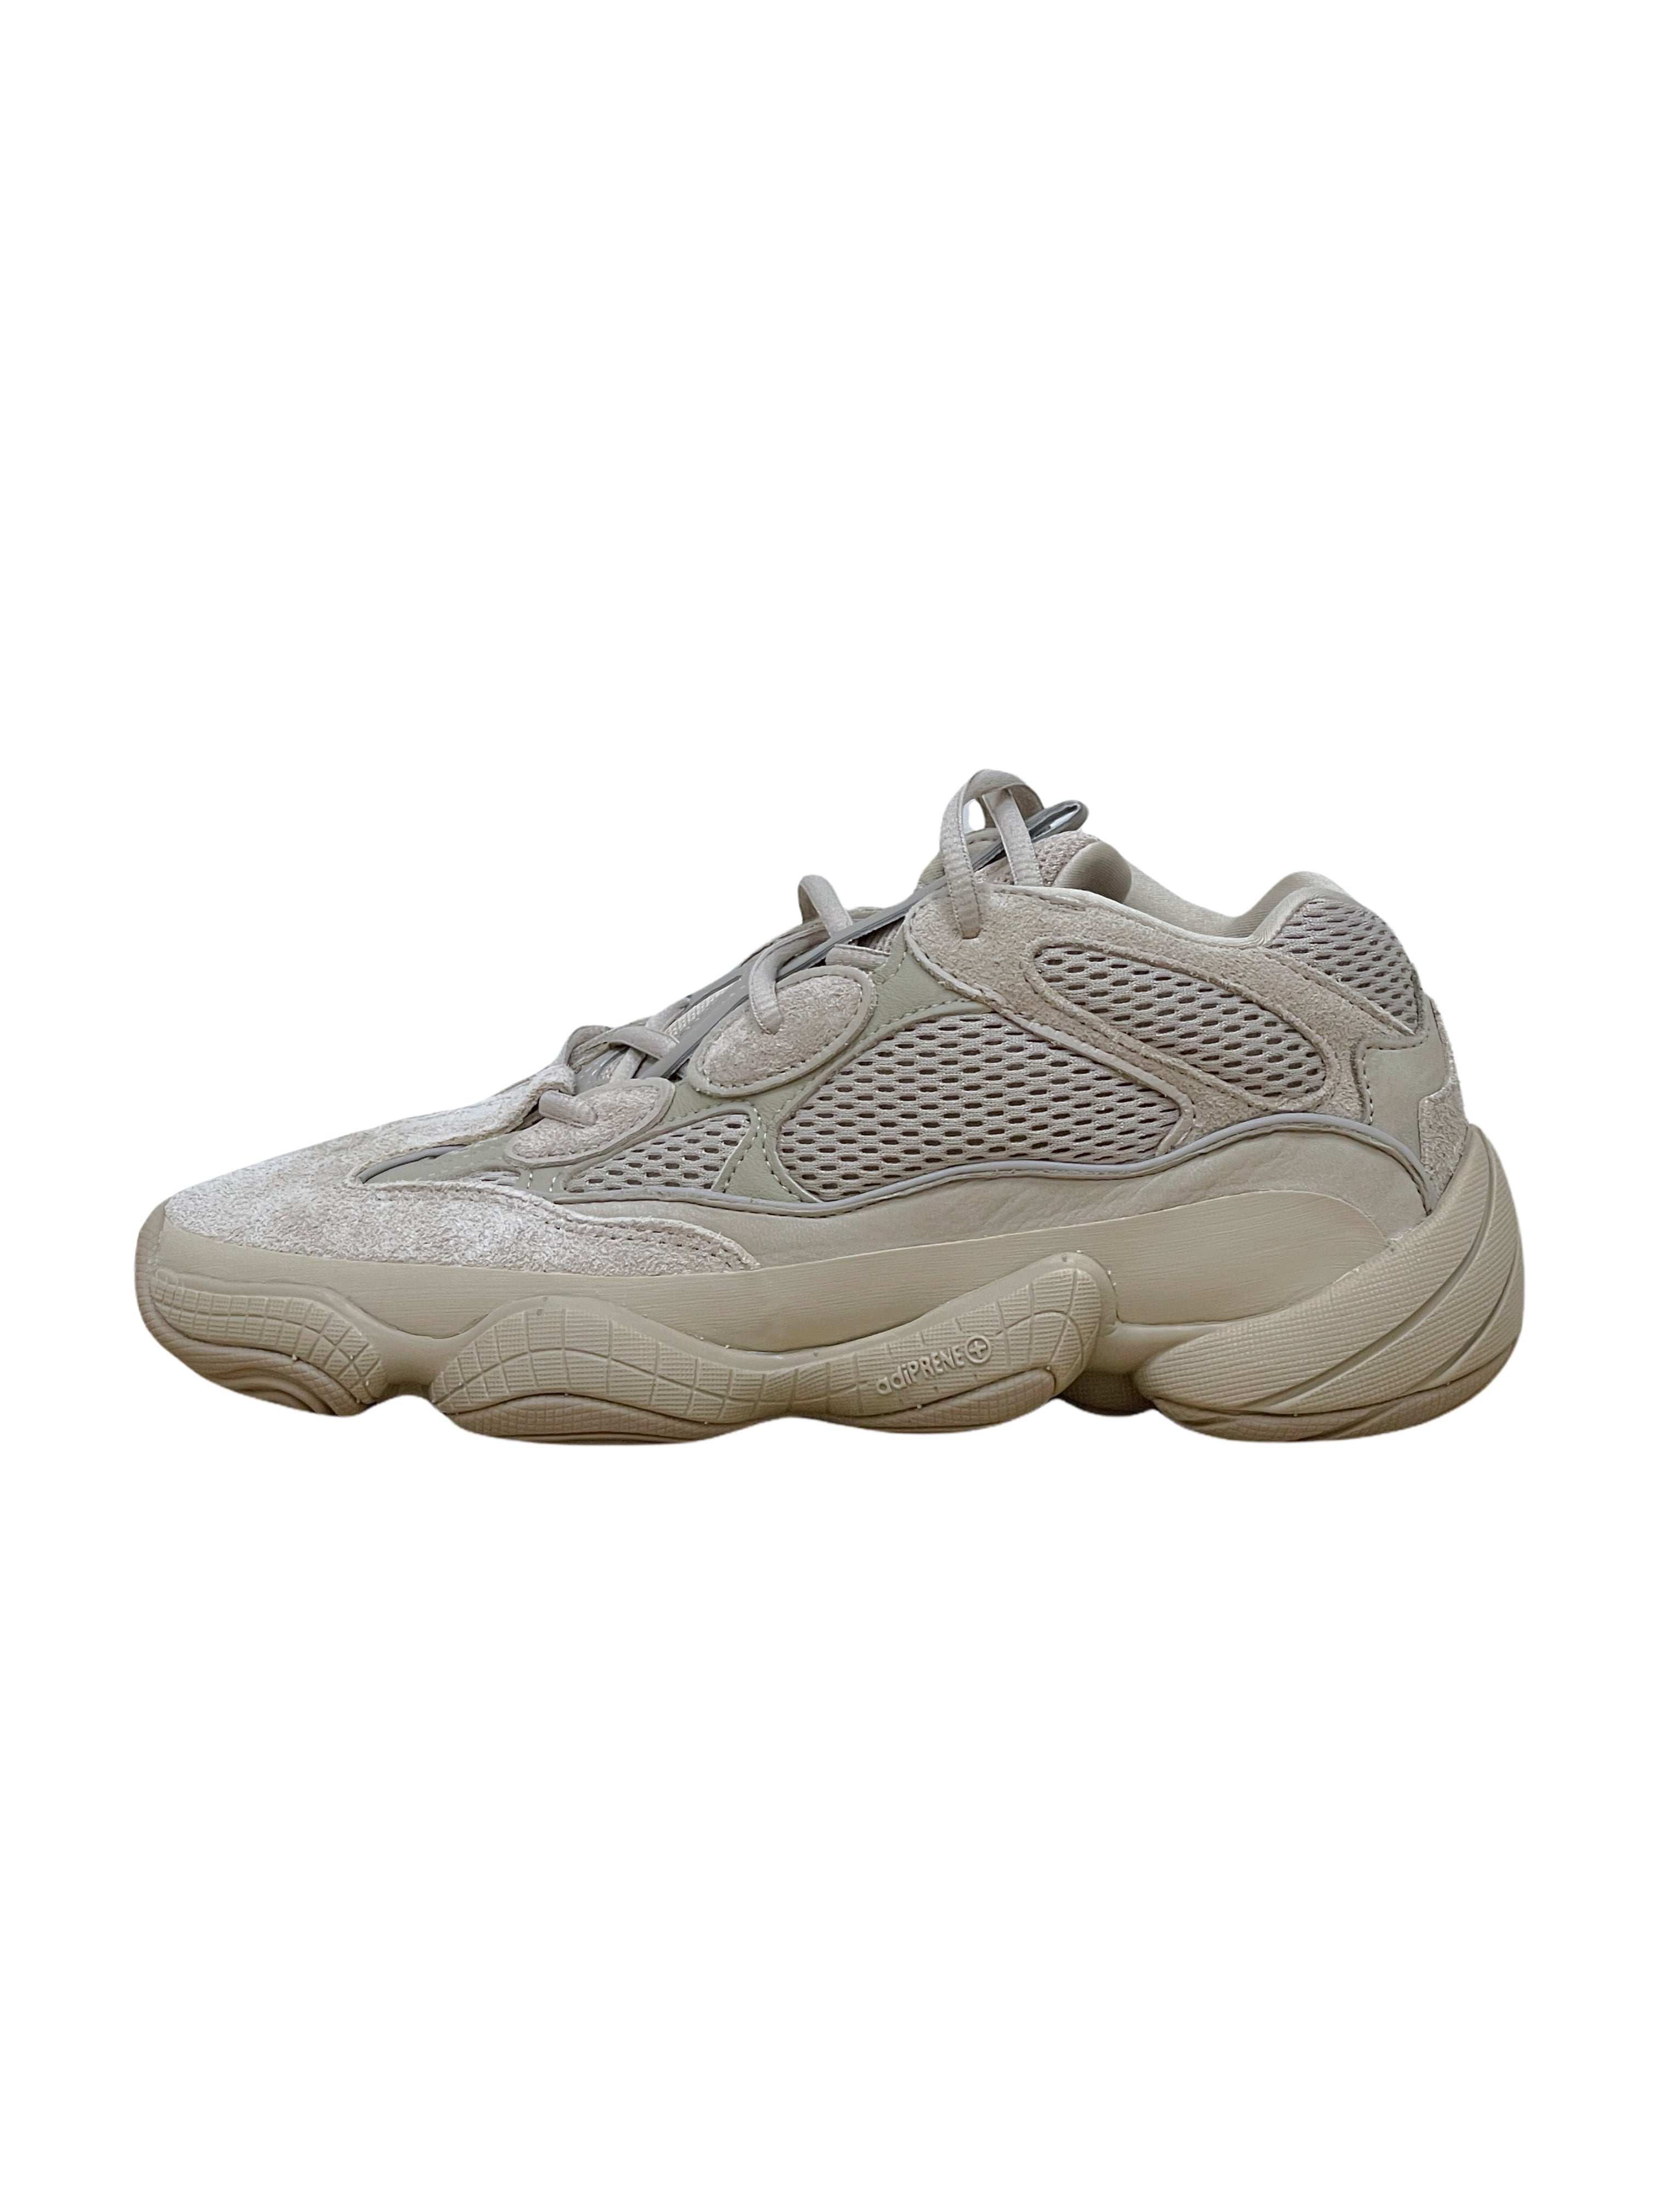 Adidas Yeezy 500 Taupe Light Sneakers